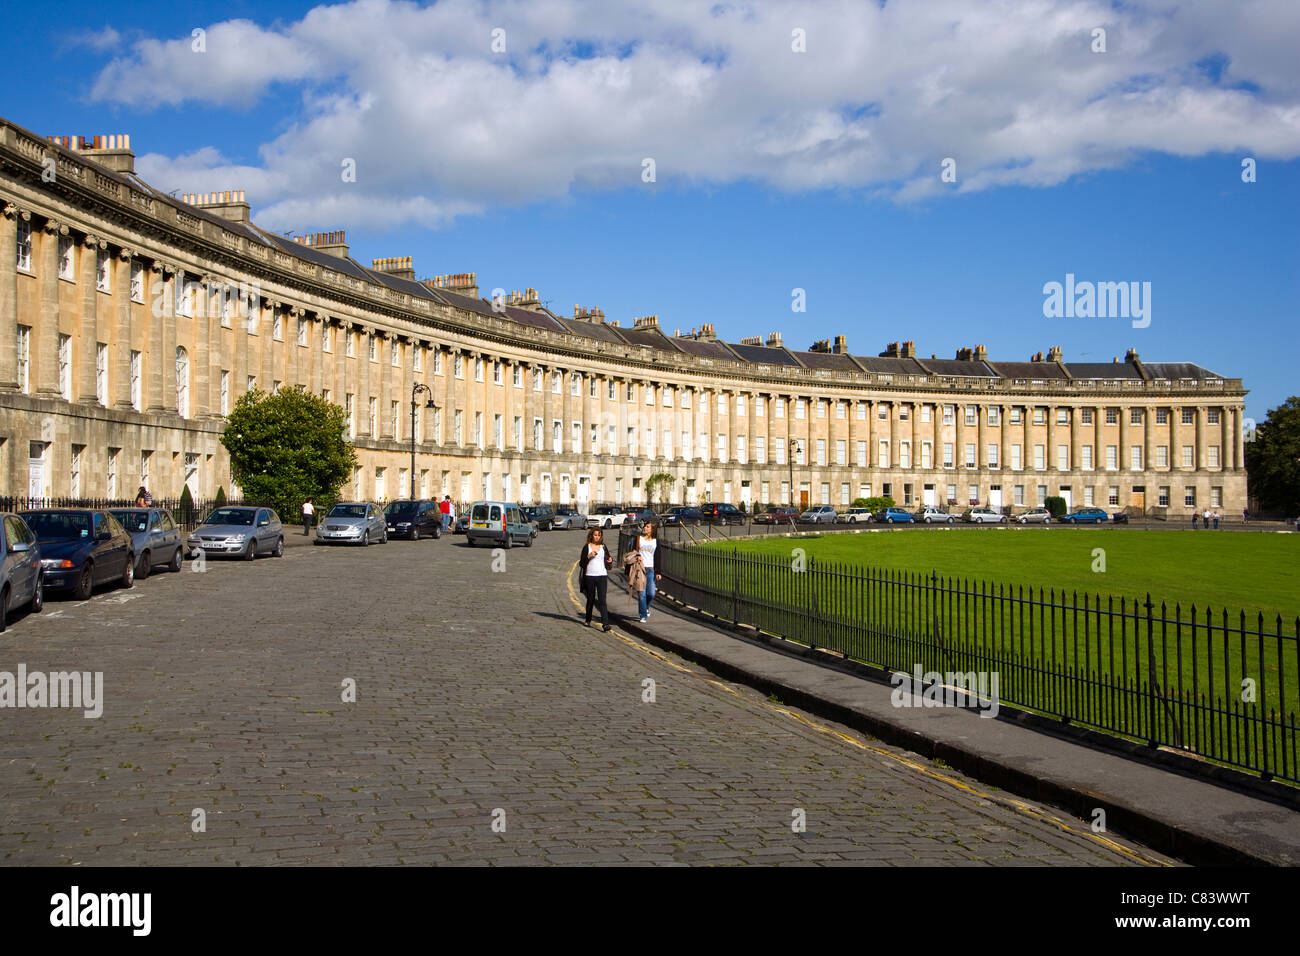 Historic terraced houses in The Royal Crescent, World Heritage City, Bath, Somerset, England, UK, Stock Photo